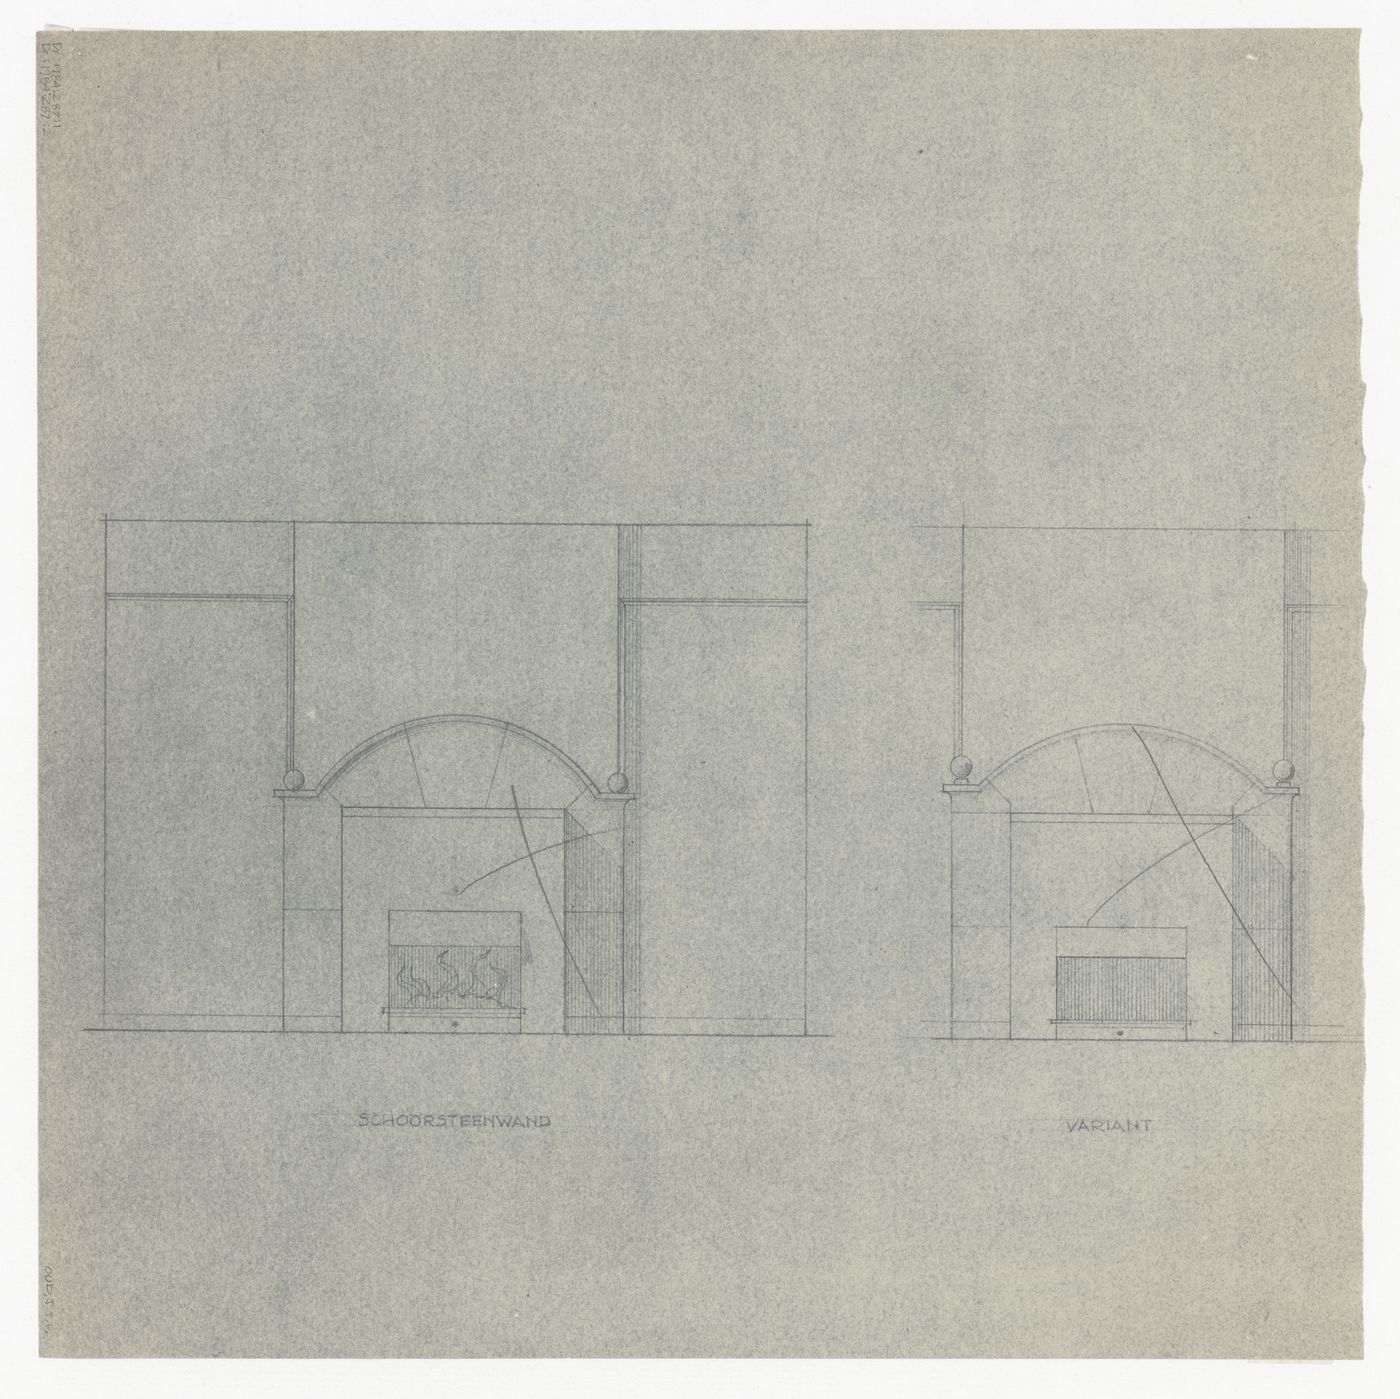 Elevation and molding details for a model for a city hall for the reconstruction of the Hofplein (city centre), Rotterdam, Netherlands; verso: Elevations for a fireplace for Olveh mixed-use development, Rotterdam, Netherlands